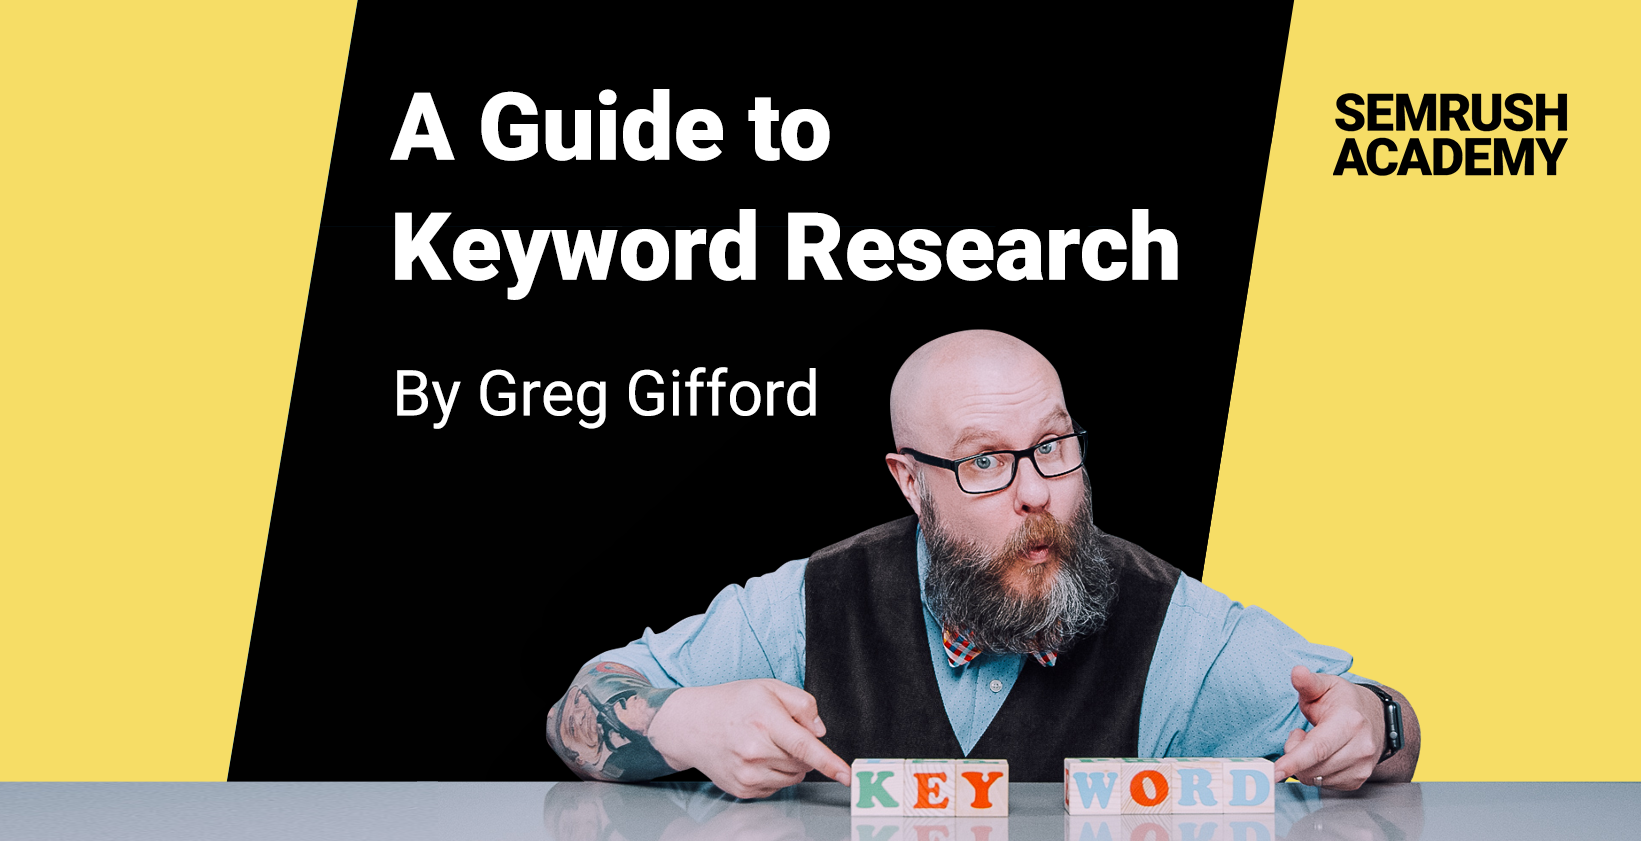 A Guide to Keyword Research